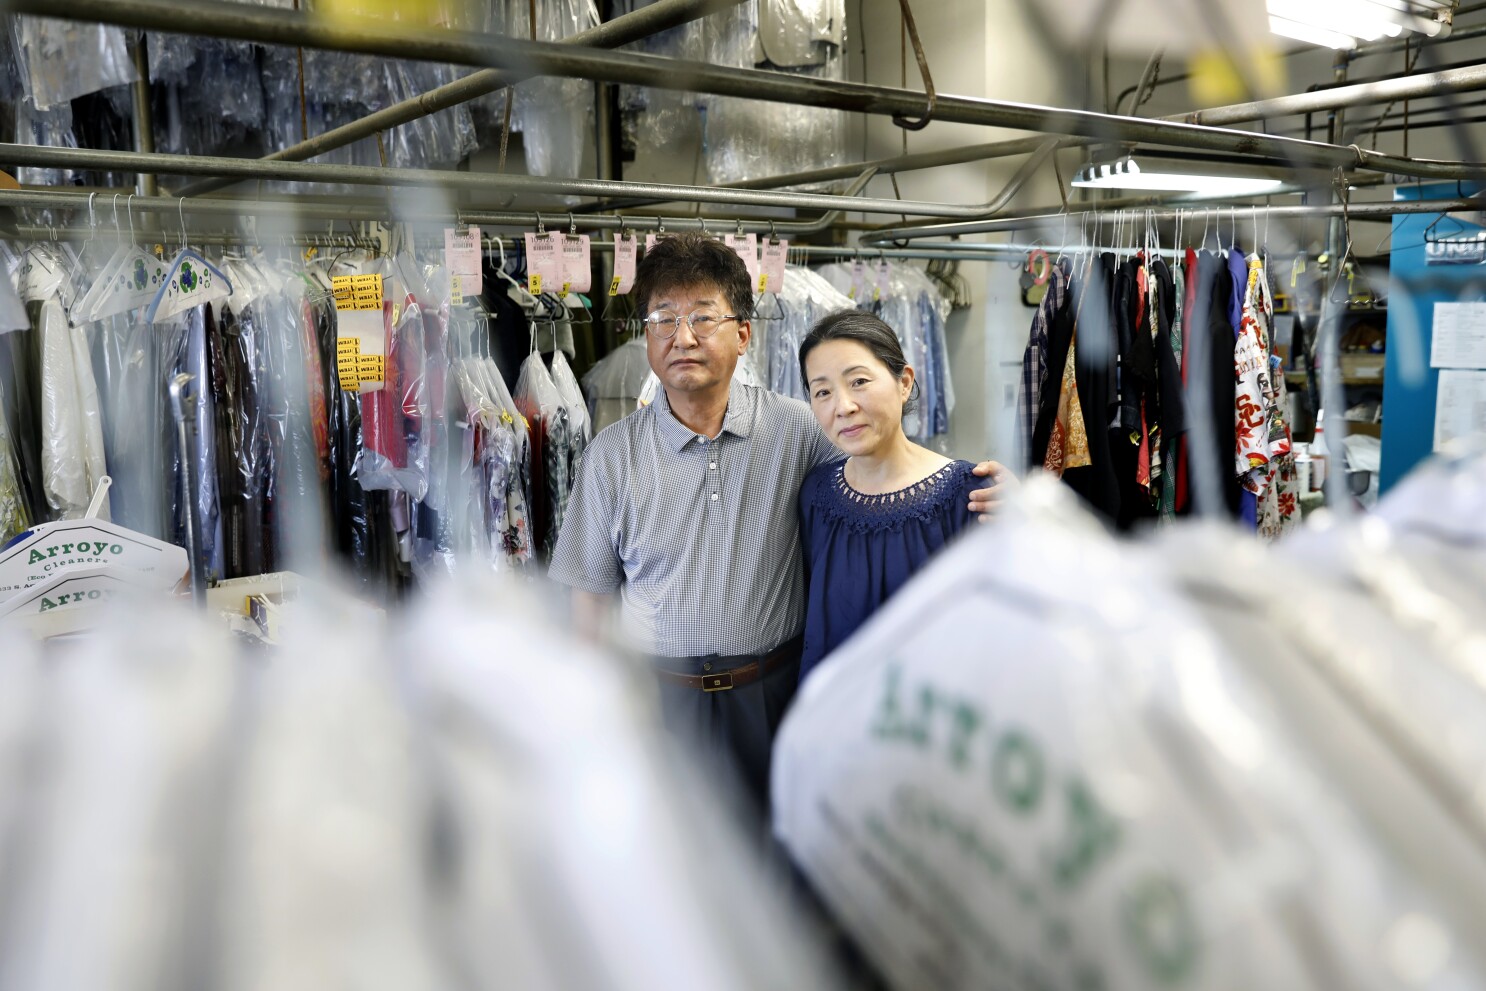 Fewer Koreans are running dry cleaning businesses - Los Angeles Times